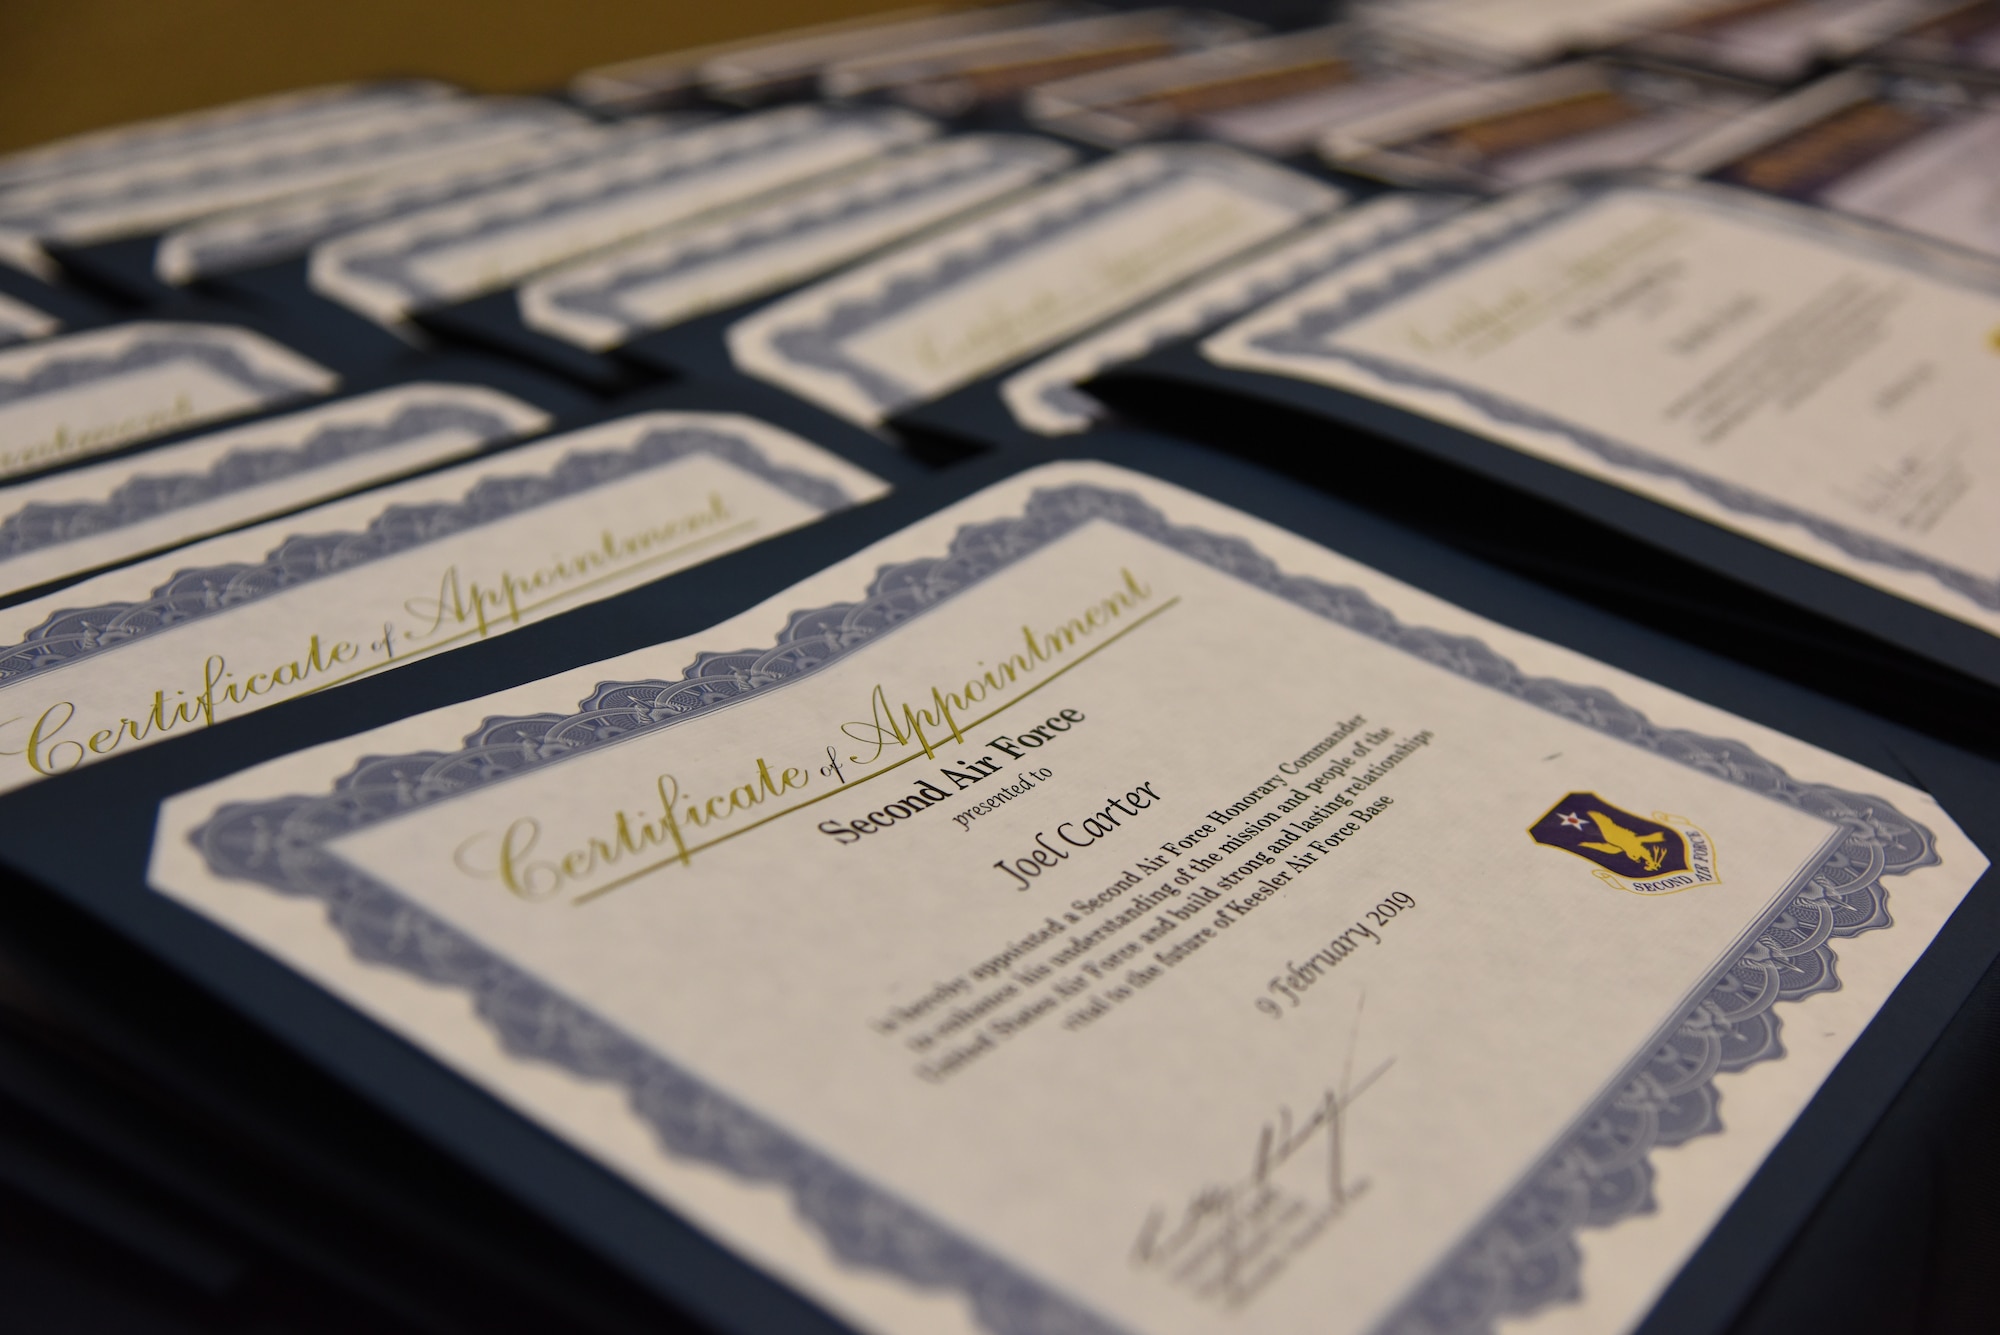 Certificates are displayed during the 2019 Honorary Commander Induction Ceremony inside the Bay Breeze Event Center at Keesler Air Force Base, Mississippi, Feb. 9, 2019. The event recognized the newest members of Keesler's honorary commander program, which is a partnership between military commanders and local civic and business leaders in order to enrich and strengthen the relationship between the base and the community. This was the first time leadership from the 2nd Air Force, 81st Training Wing and 403rd Wing combined to host a single joint induction ceremony. (U.S. Air Force photo by Kemberly Groue)